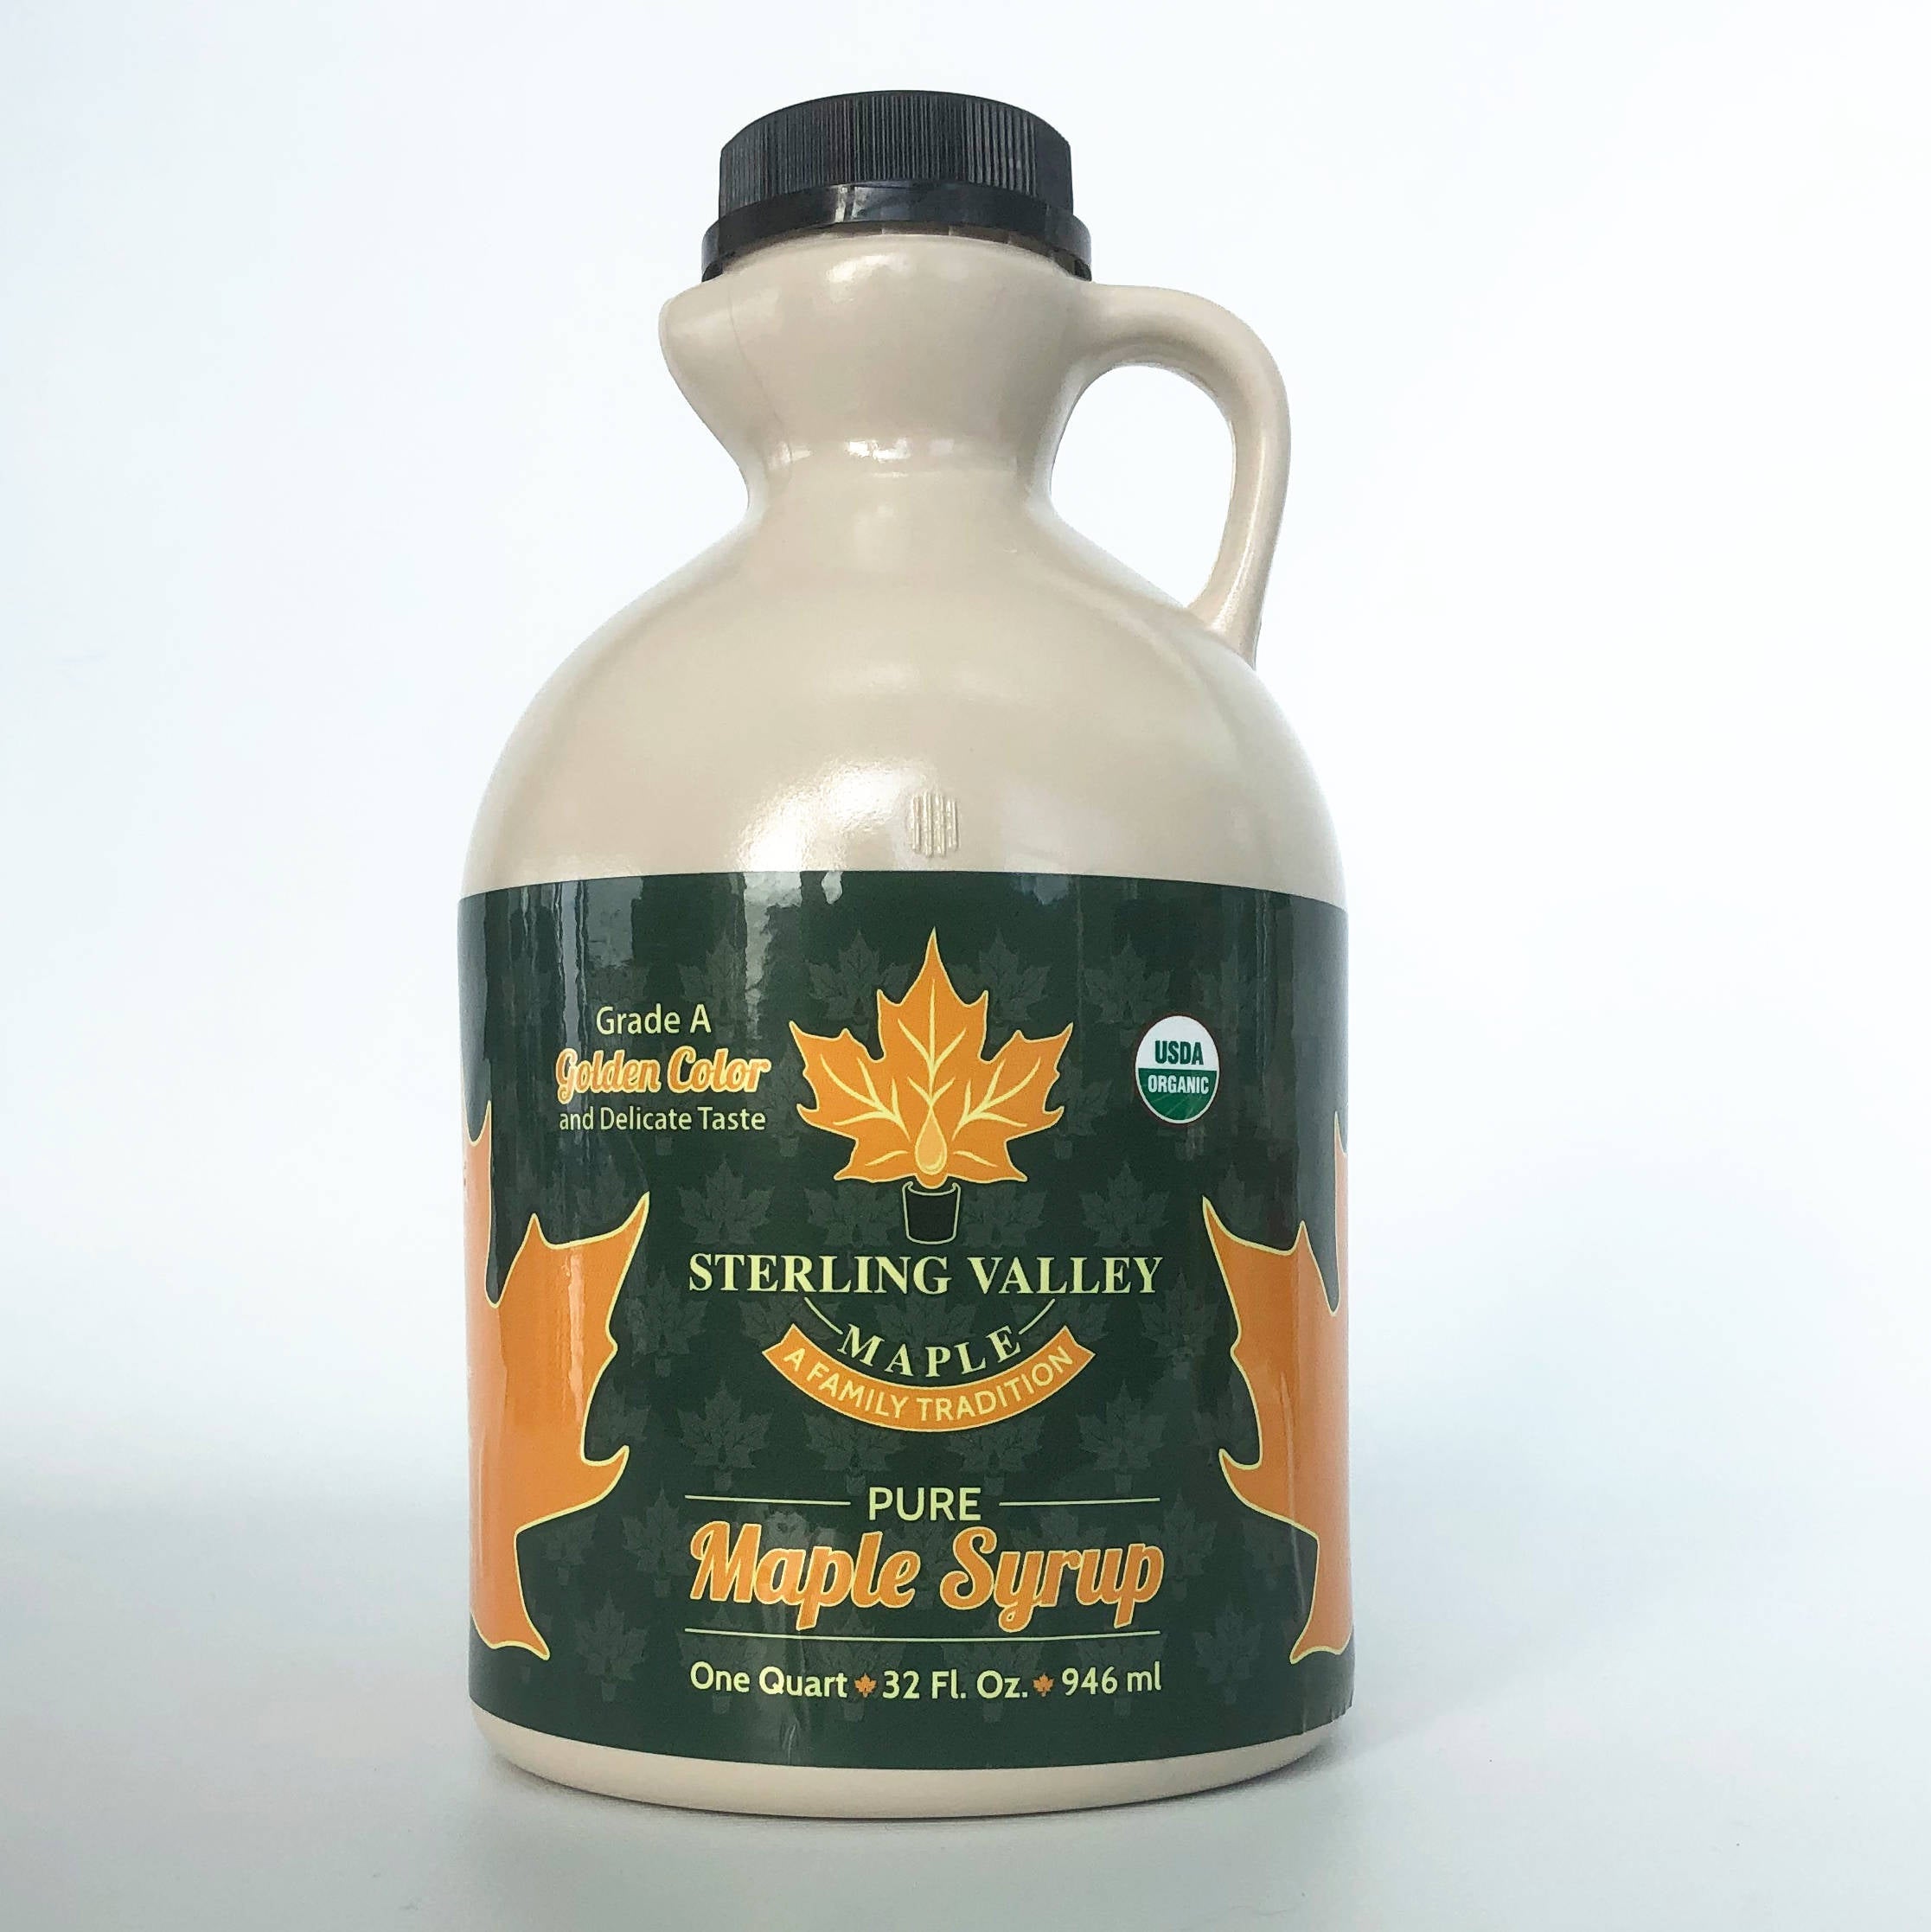 Certified Organic Maple Syrup:  Golden Color with Delicate Taste